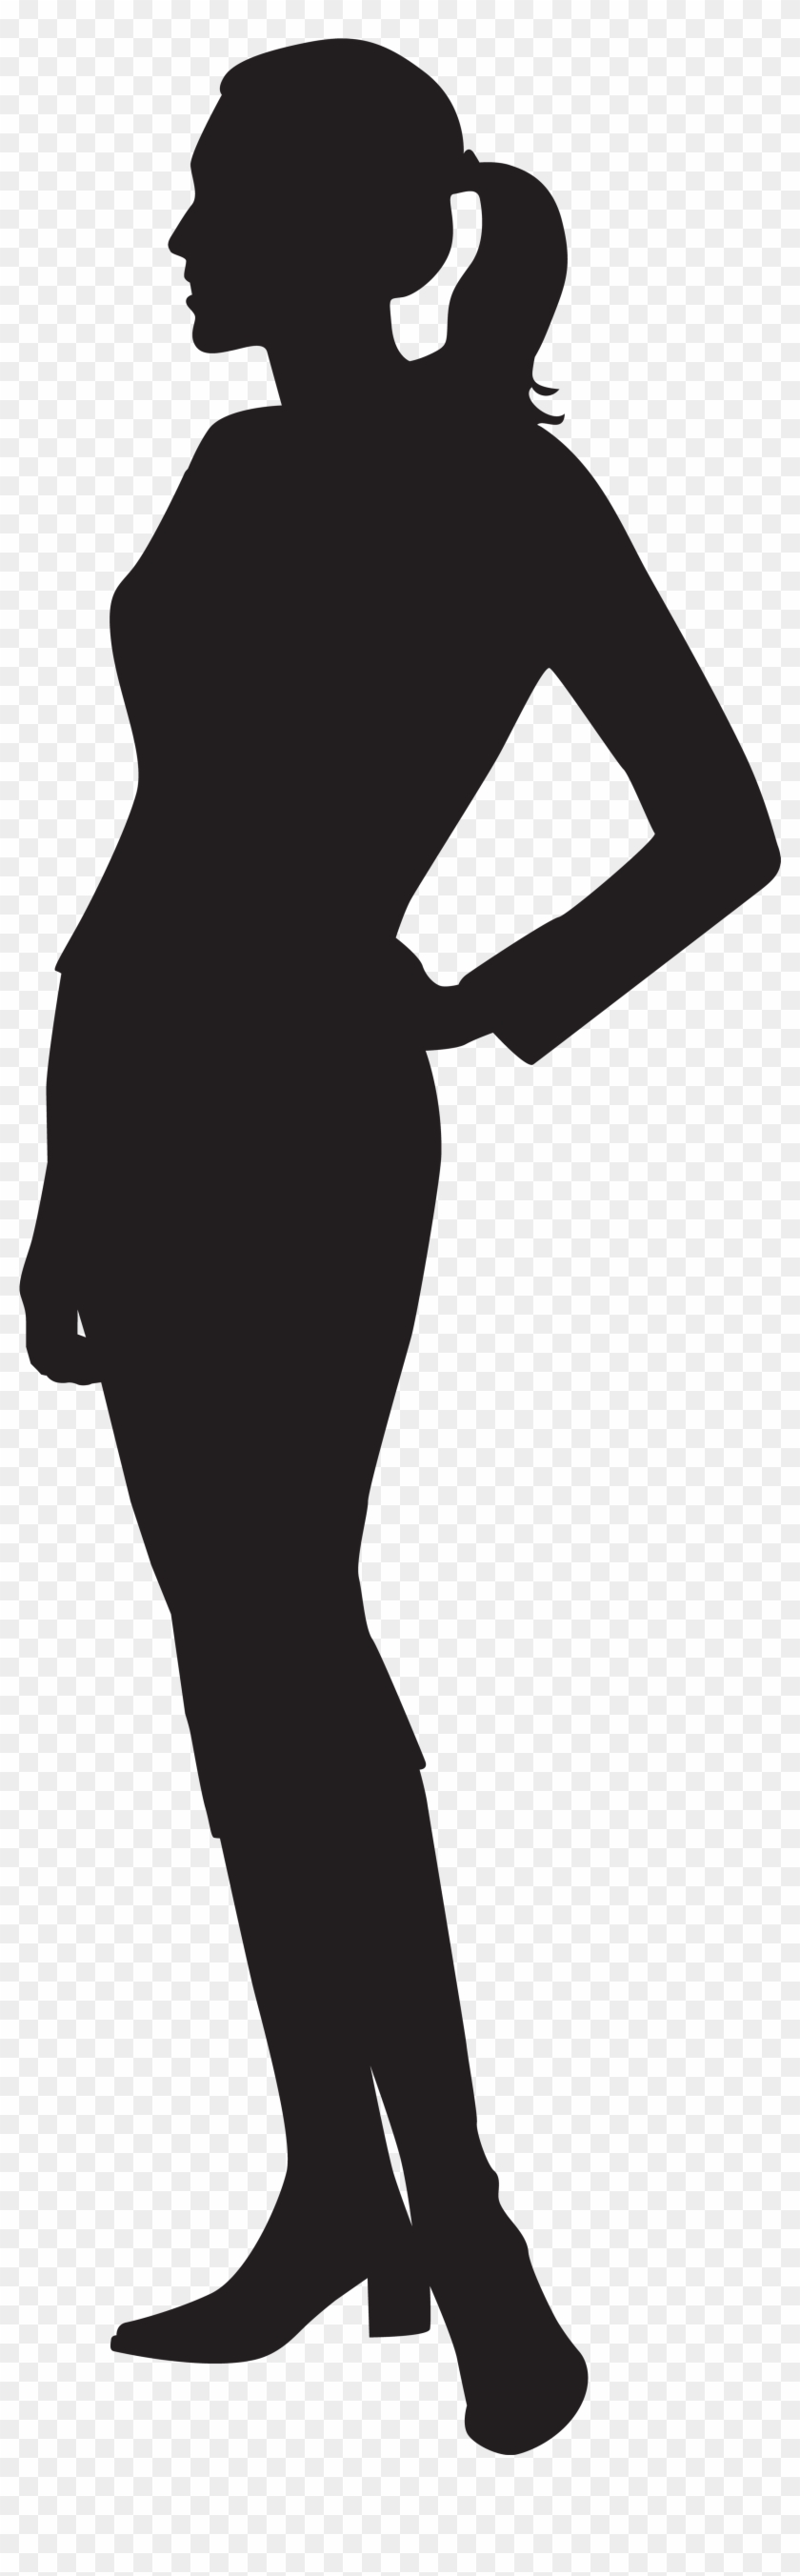 Female Silhouette Clip Art Png Imageu200b Gallery Yopriceville - Female Silhouette Png #207462